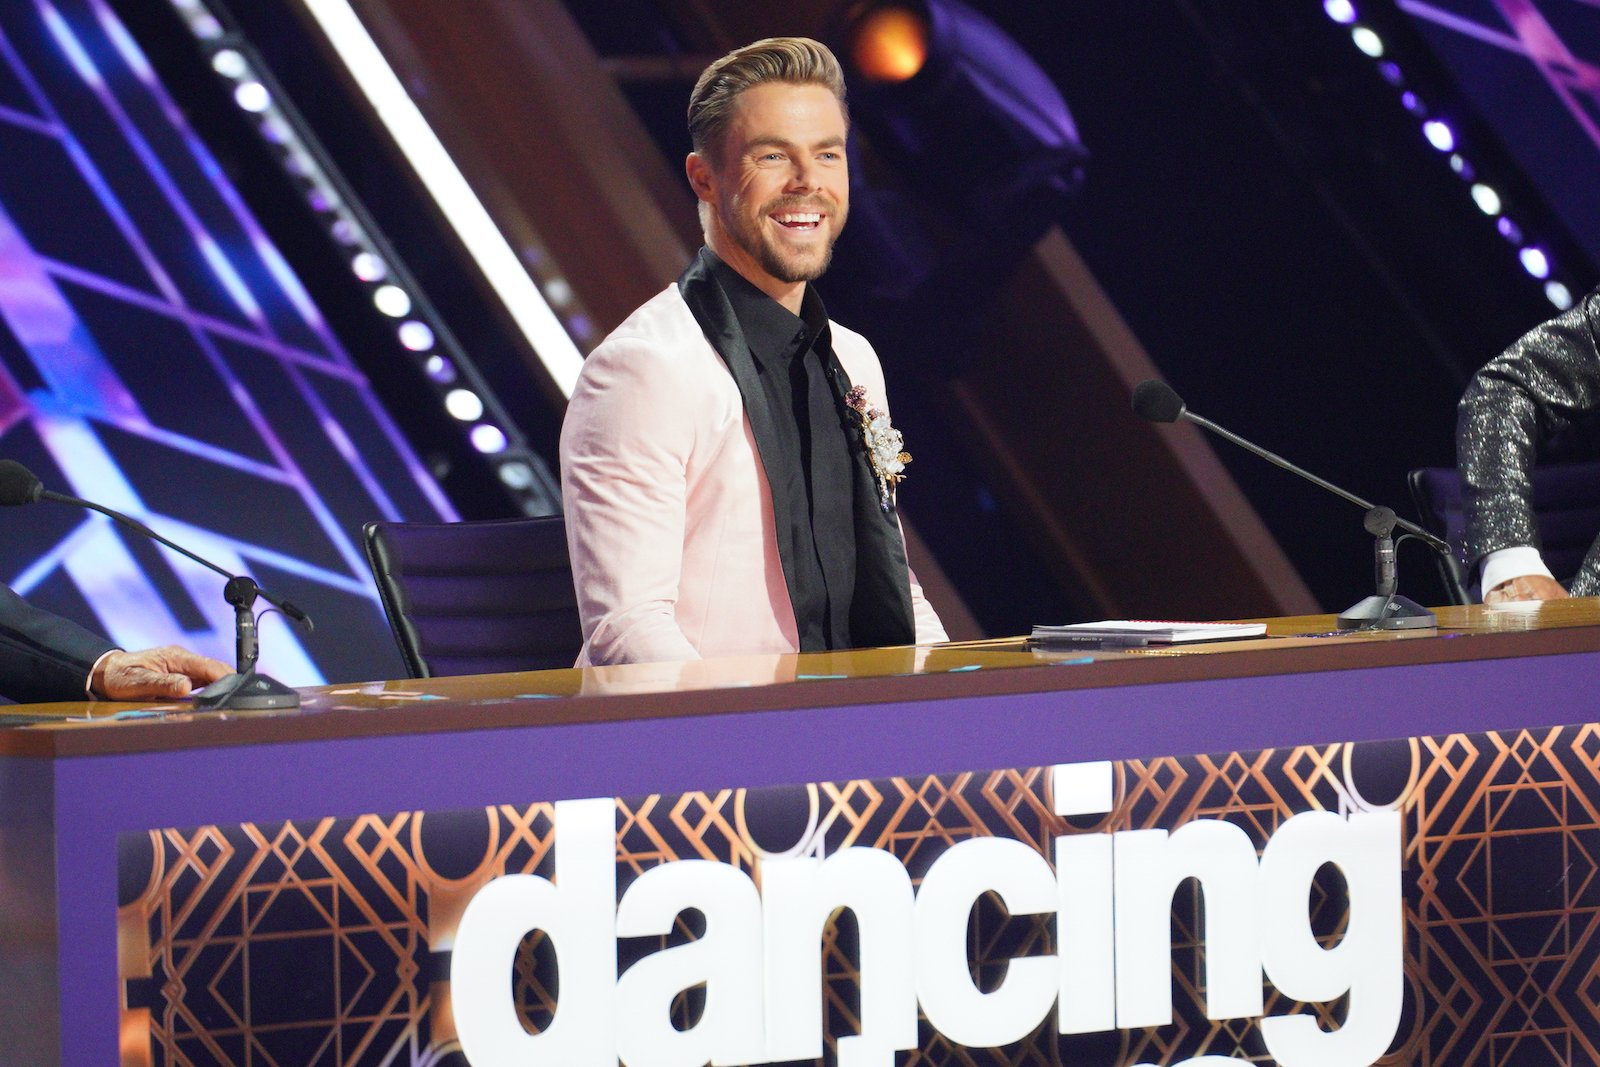 Derek Hough from Dancing with the Stars says talent has been amazing this season